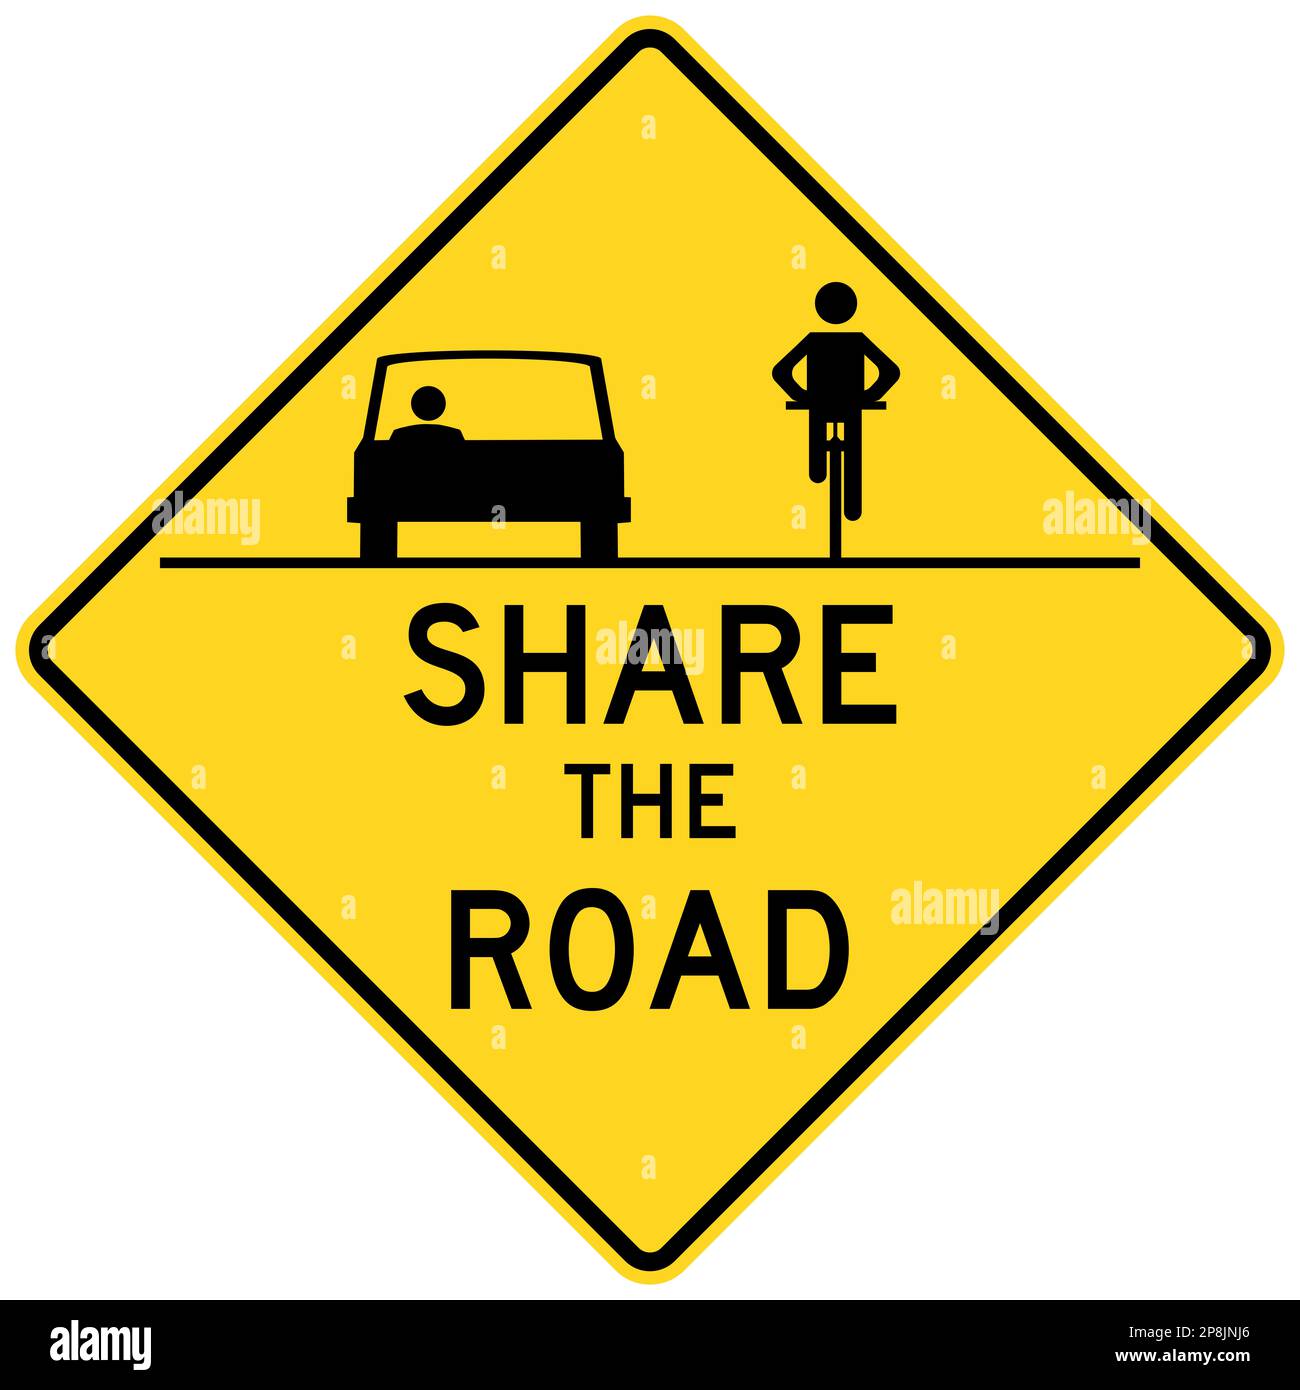 Share the road sign Stock Photo